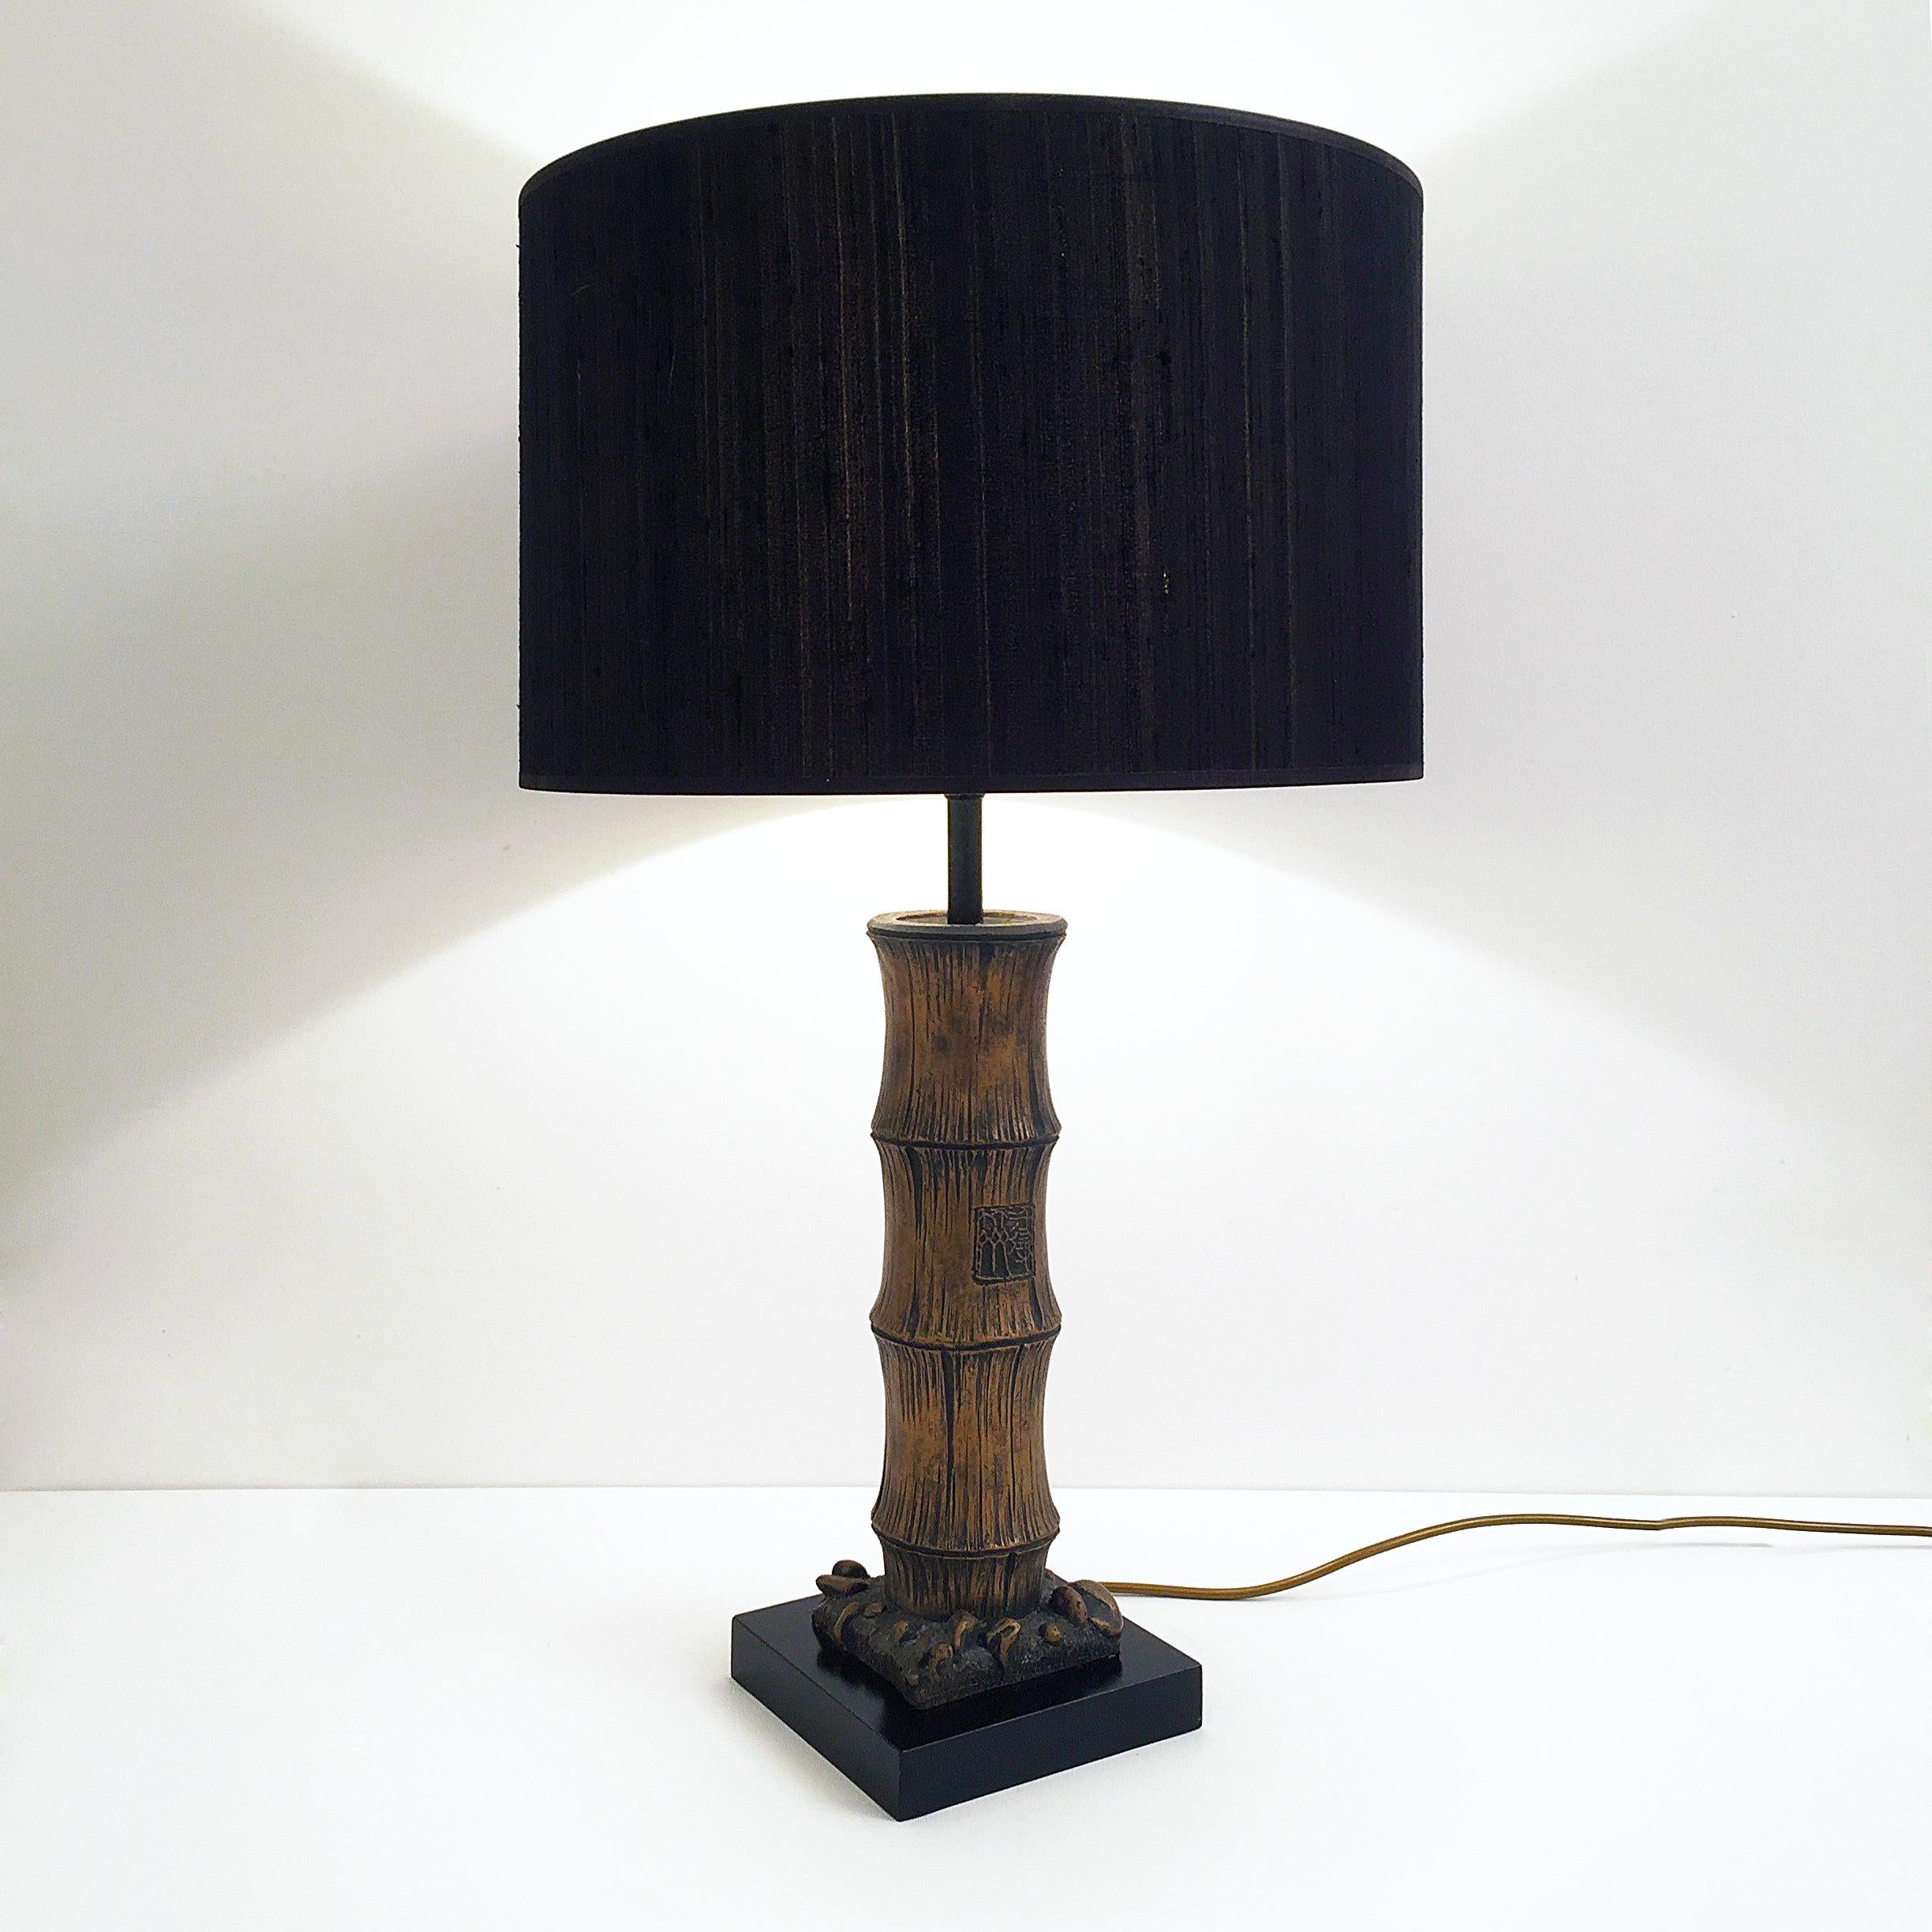 Impressive midcentury chinoiserie wood carved faux bamboo table lamp with Chinese stamped lettering on ebonized square base (lamp shade is for display purposes only).